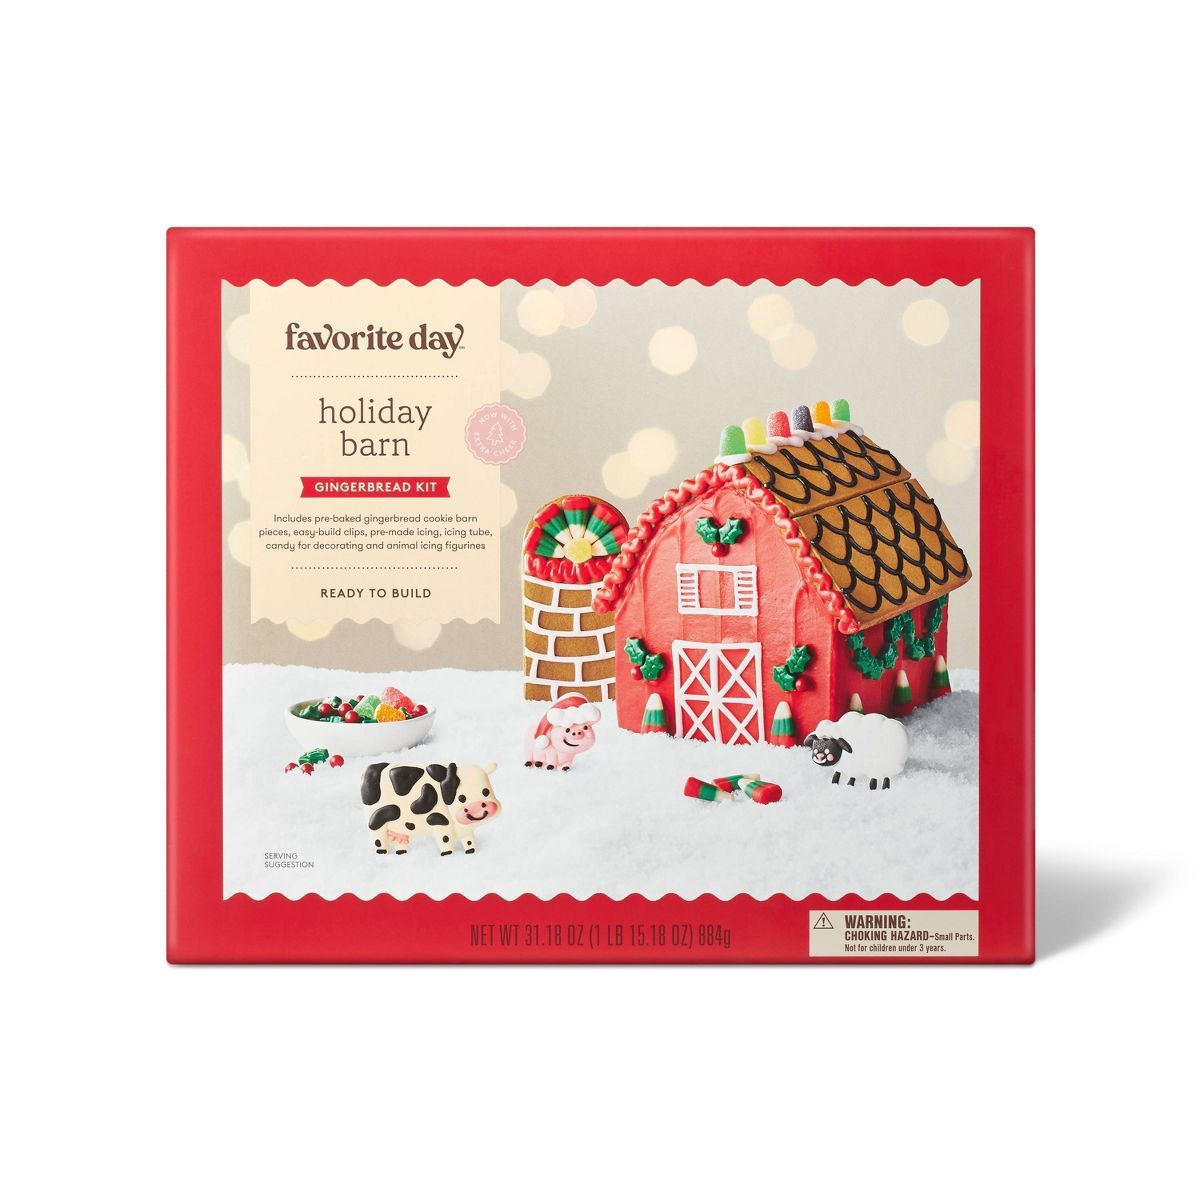 Holiday Barn Gingerbread House Kit - 31.18oz - Favorite Day™ | Target